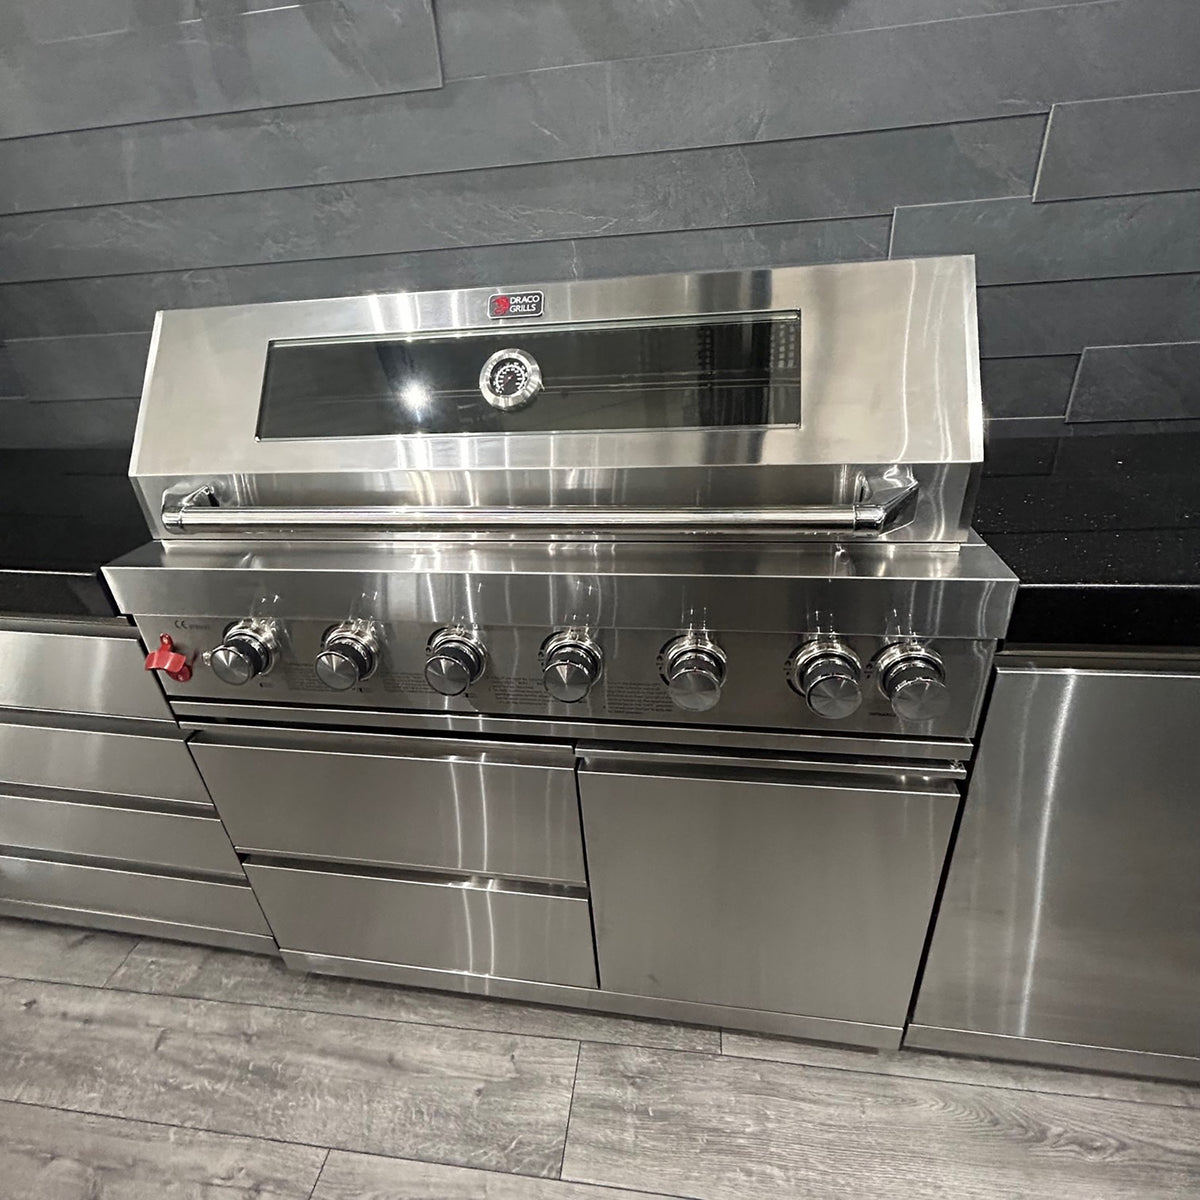 Ex Display Draco Grills 6 Burner Stainless Steel Outdoor Kitchen with 4 Drawer Unit and Single Fridge Unit